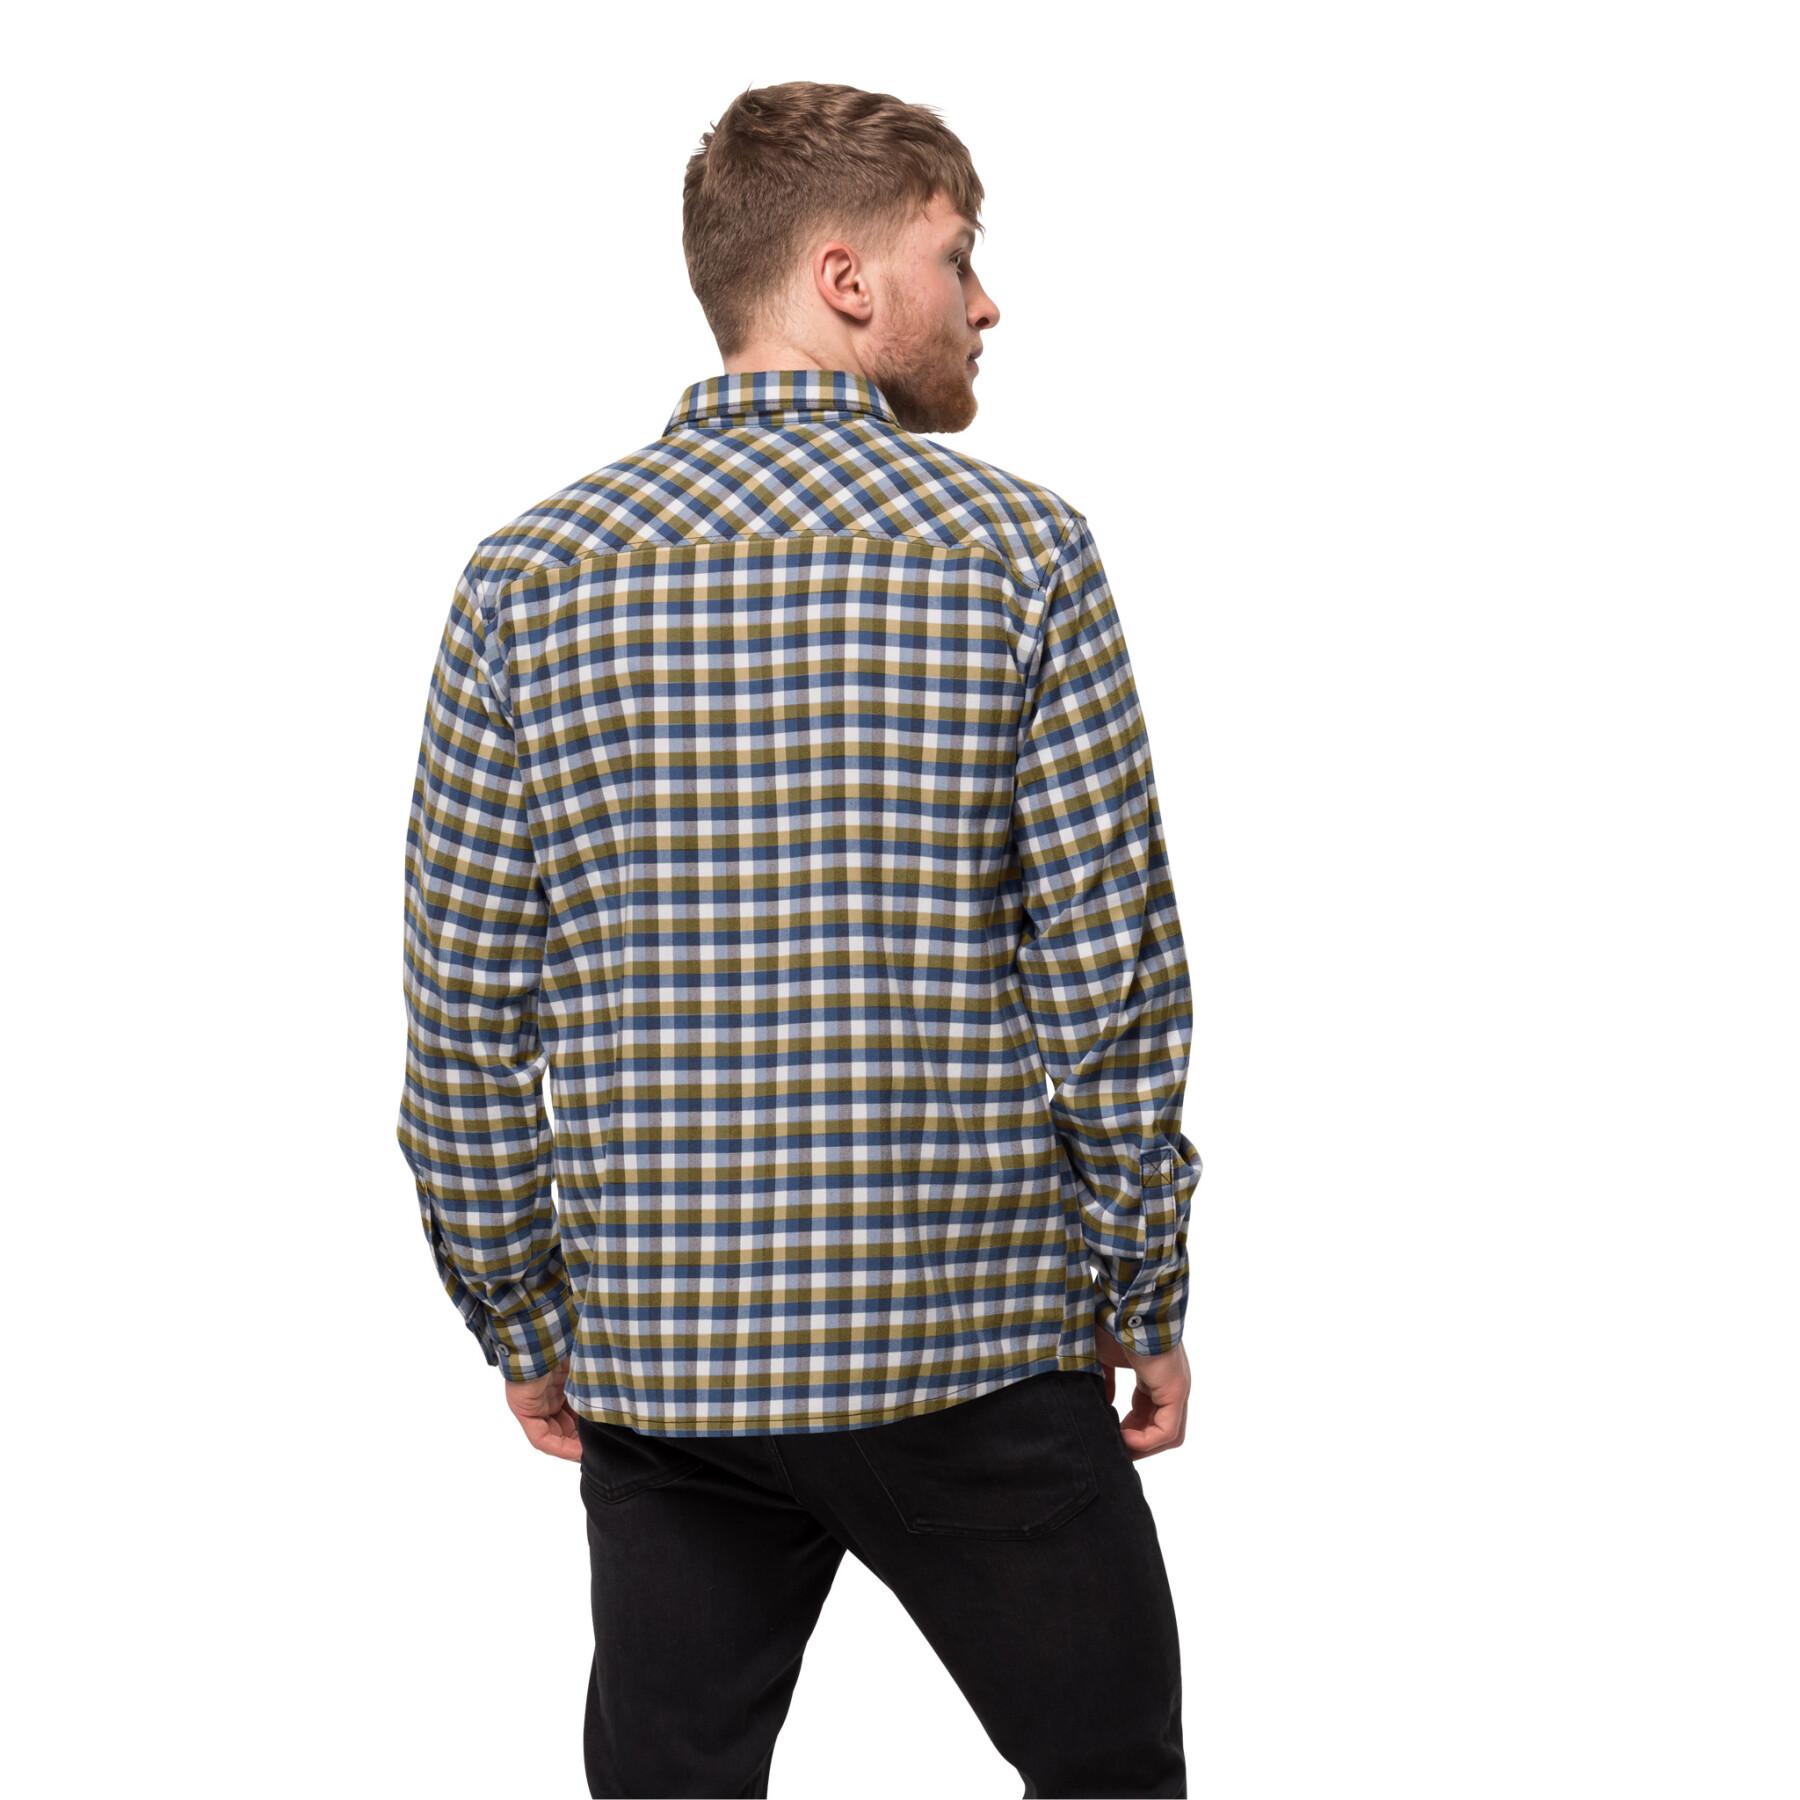 Camicia Jack Wolfskin river town